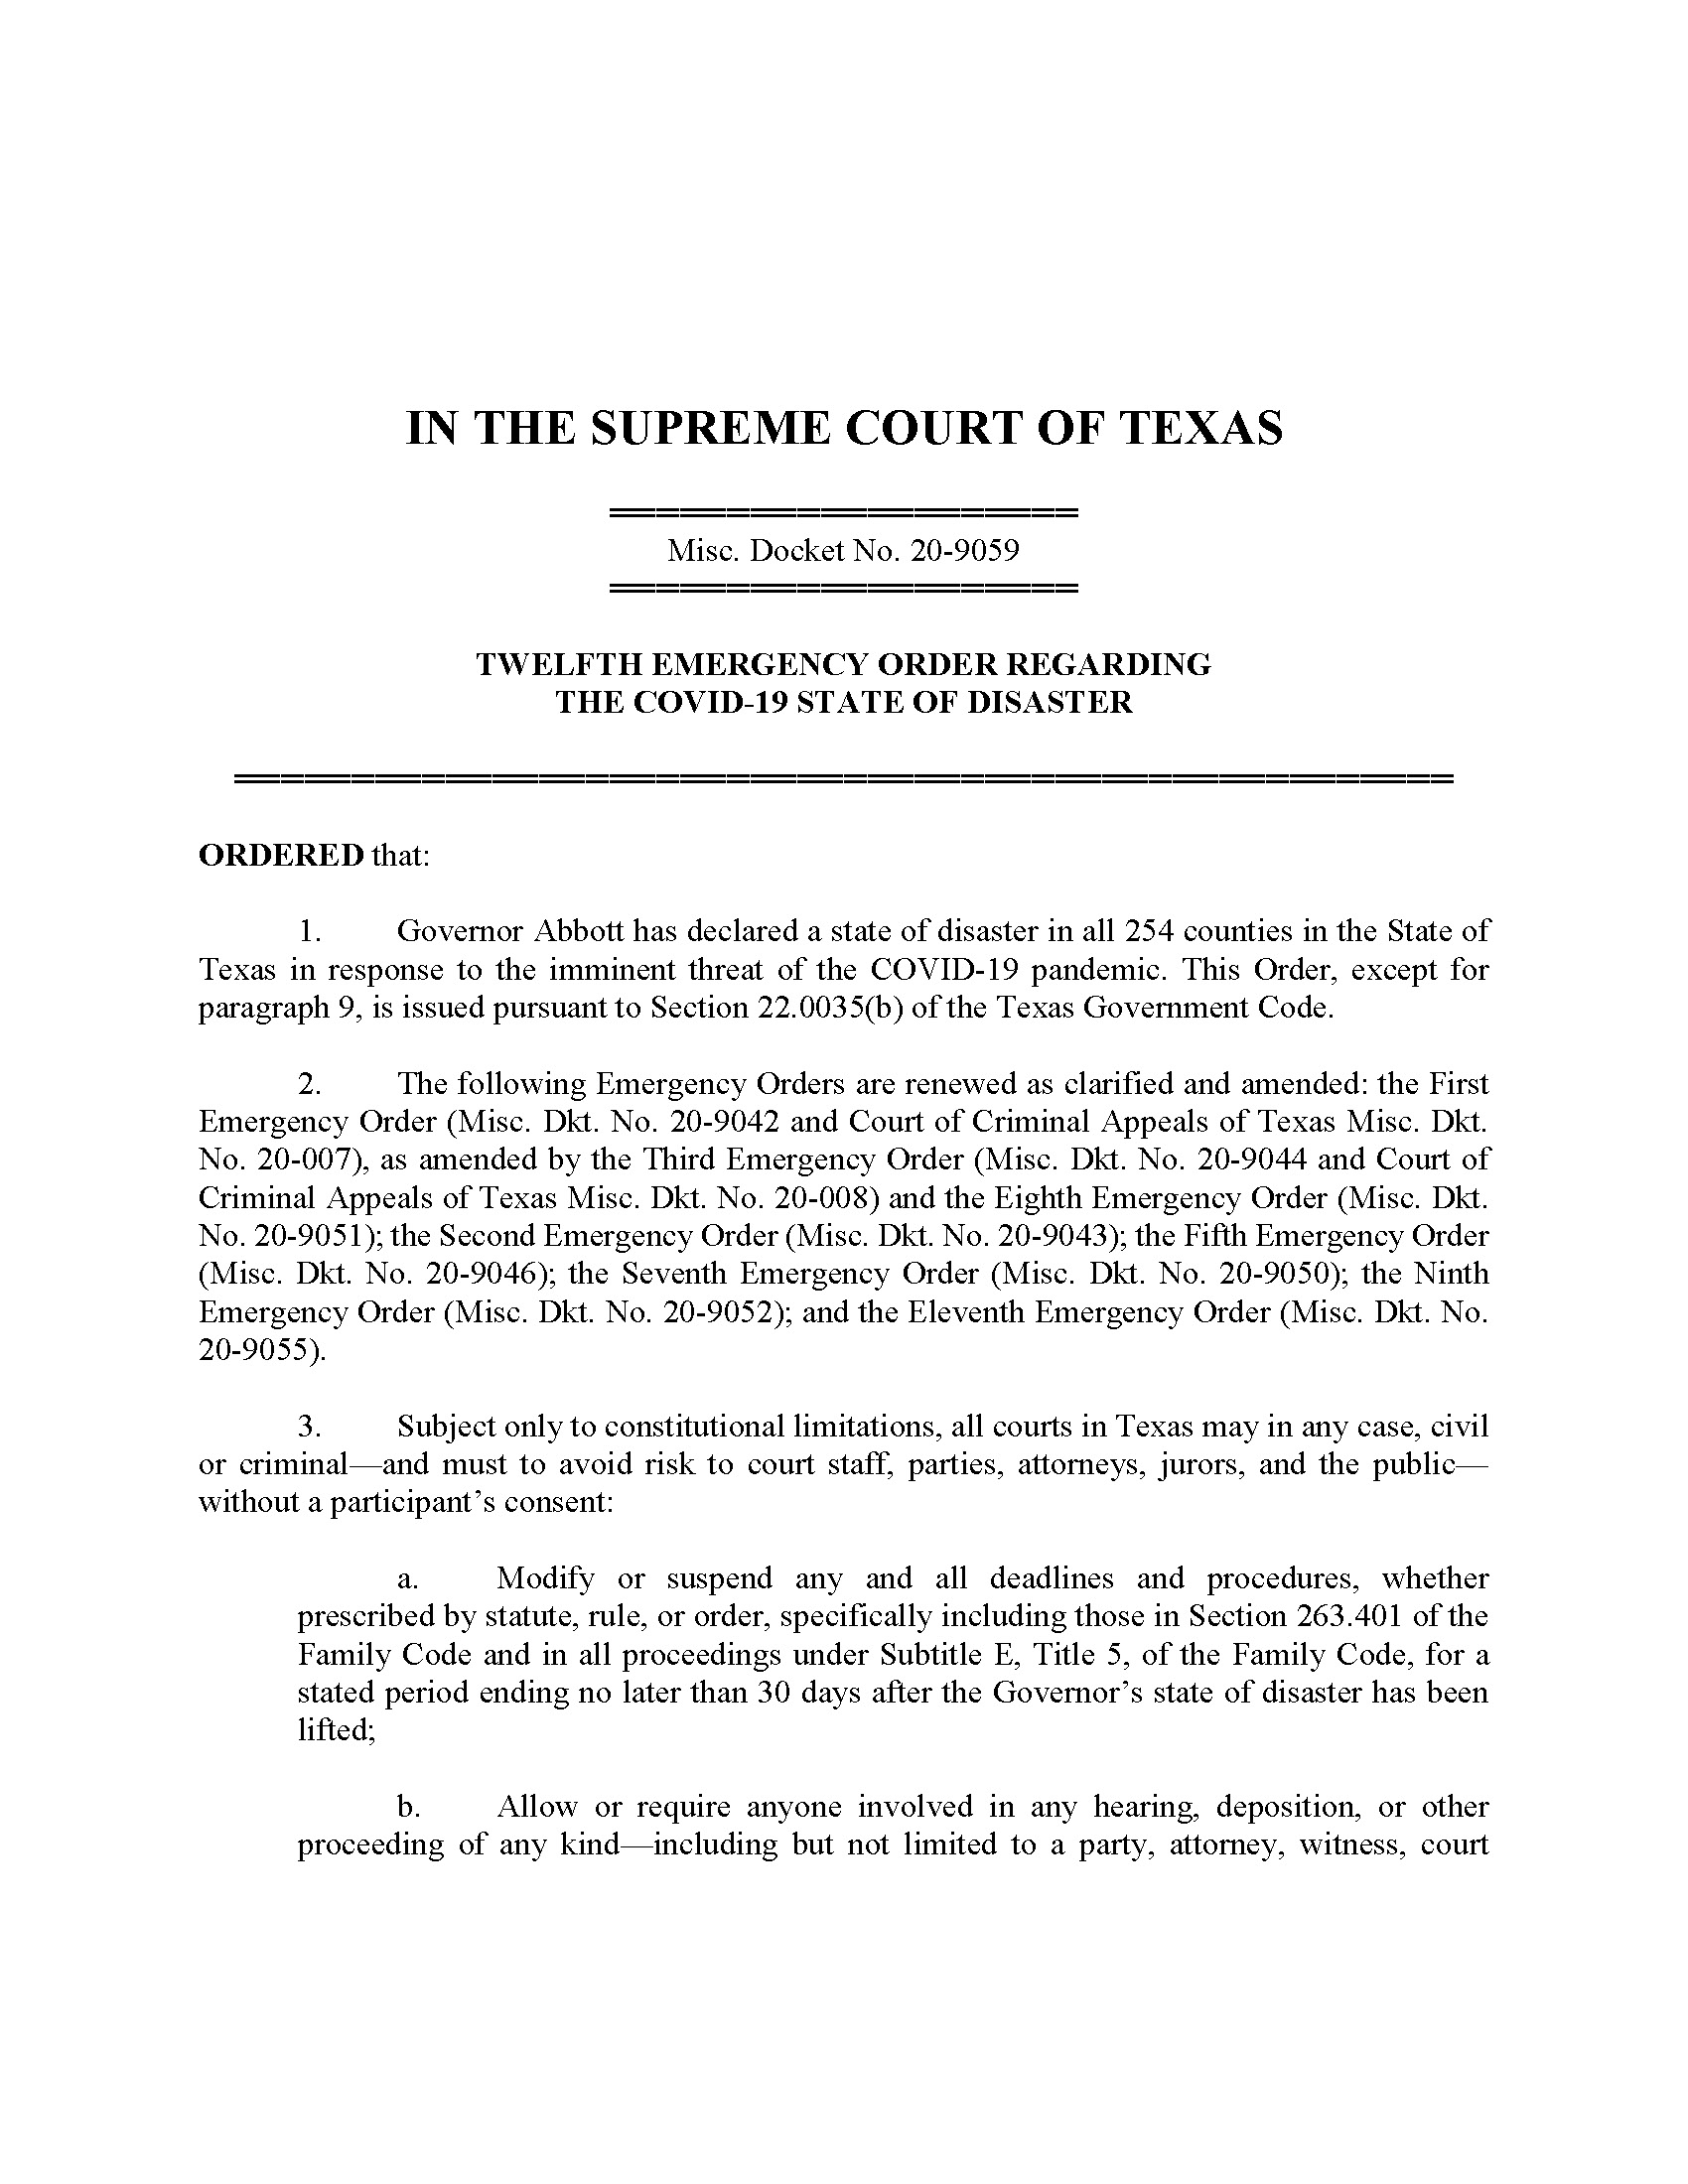 Supreme Court Of Texas Twelfth Emergency Order Page 1